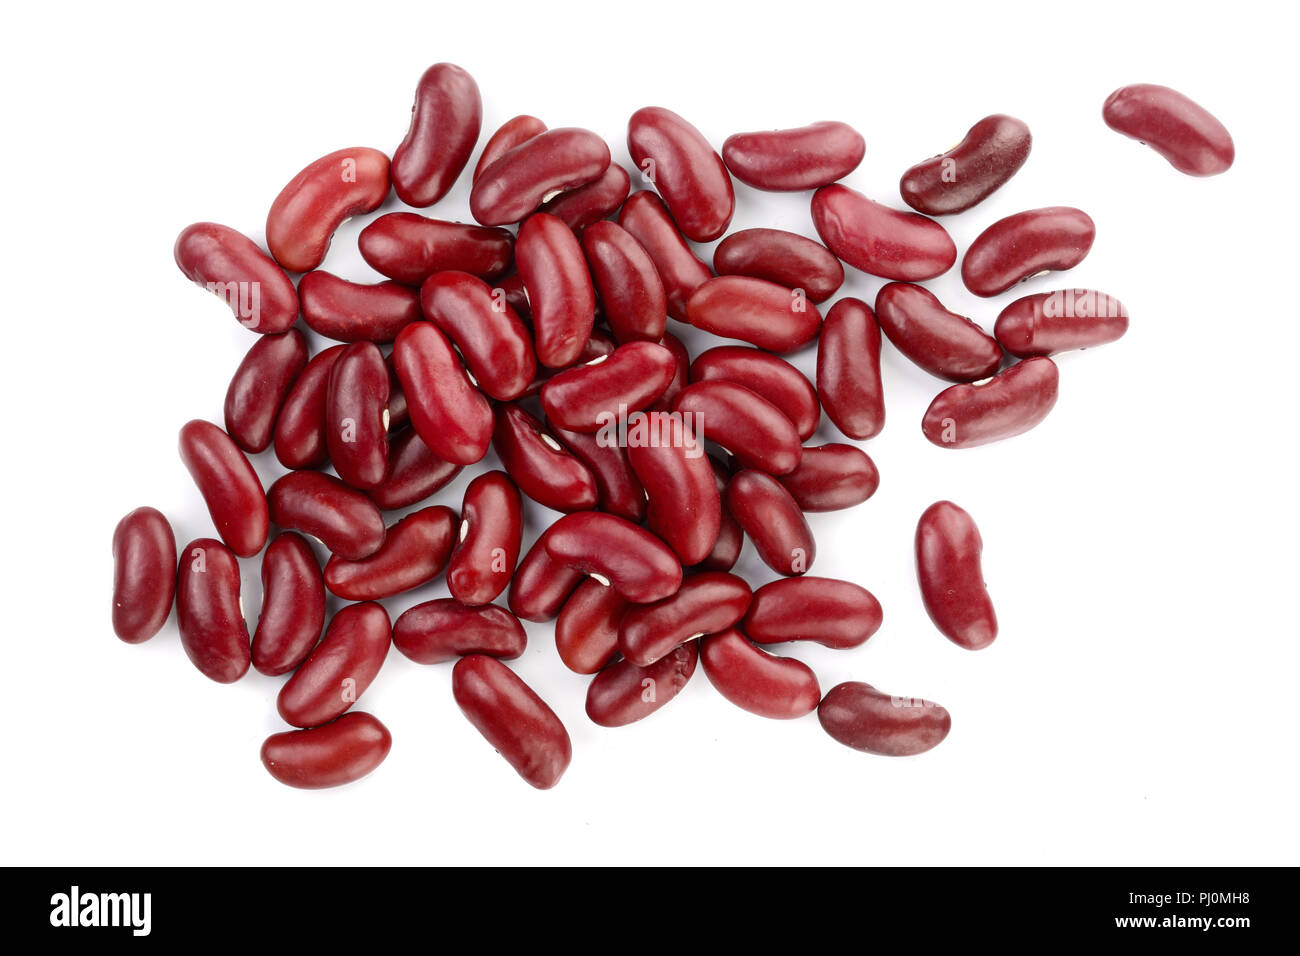 red kidney bean isolated on white background. Top view. Flat lay. Stock Photo